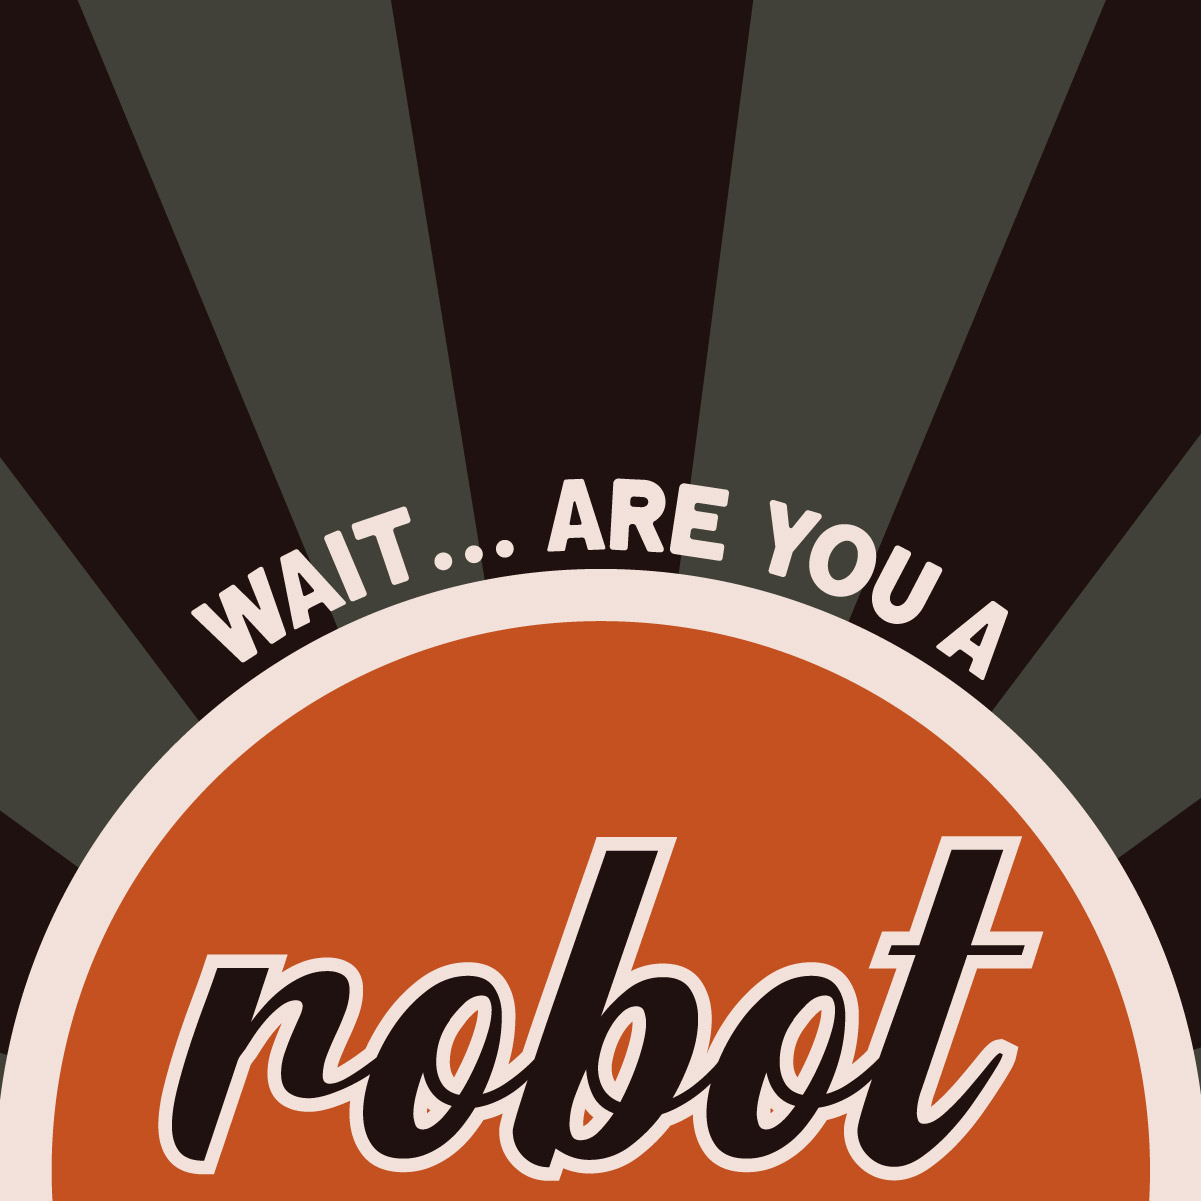 Wait...are you a robot?